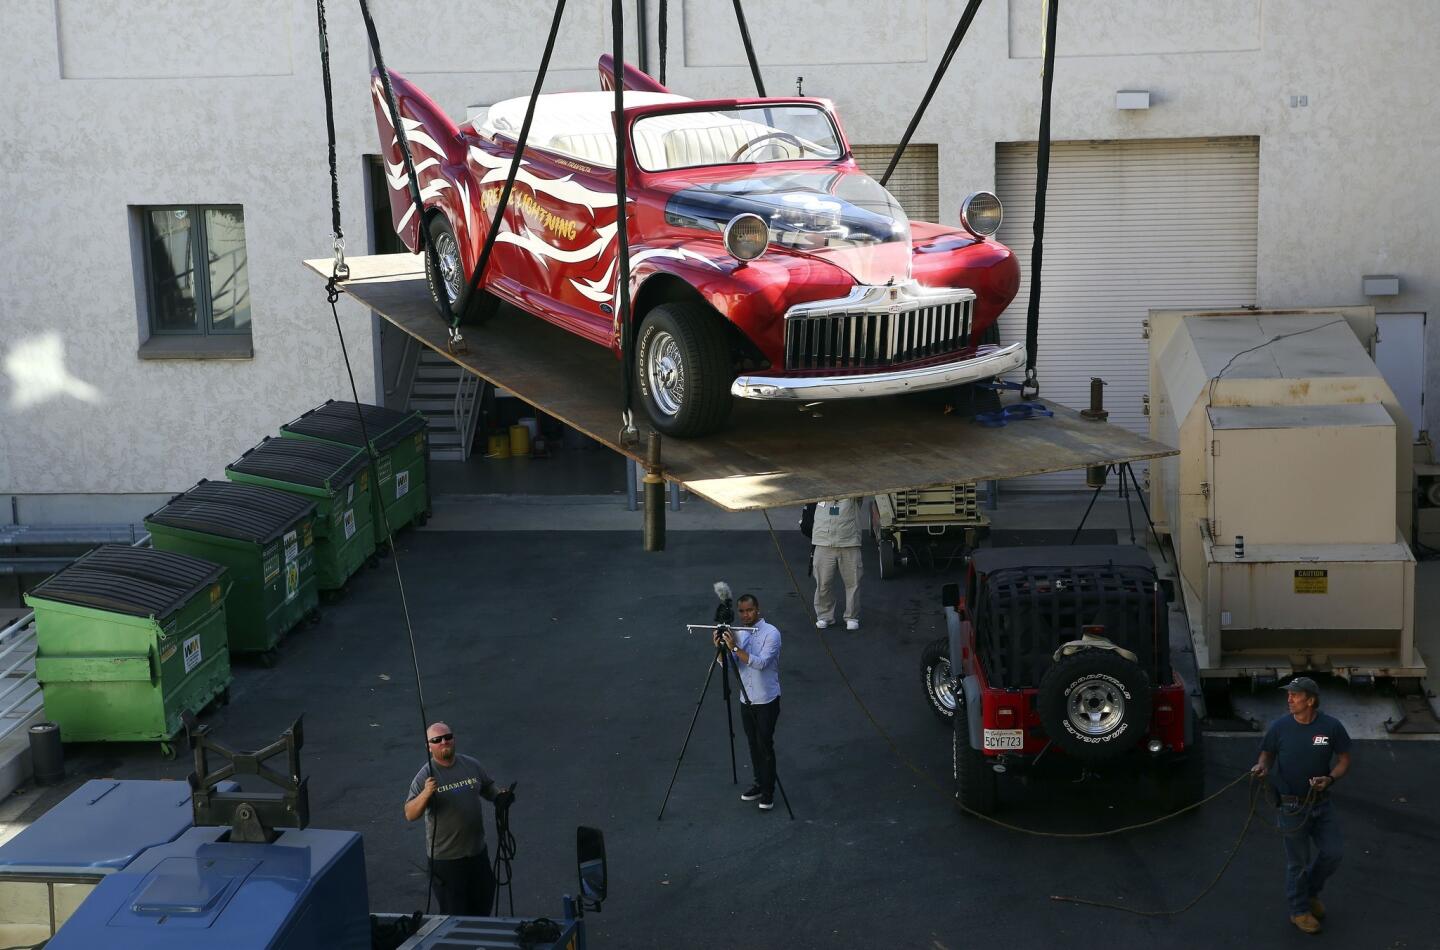 The 1946 custom Ford used by John Travolta and Olivia Newton-John in the 1978 movie "Grease" is hoisted by a crane to the second-story gallery at the Ronald Reagan Presidential Library in Simi Valley.